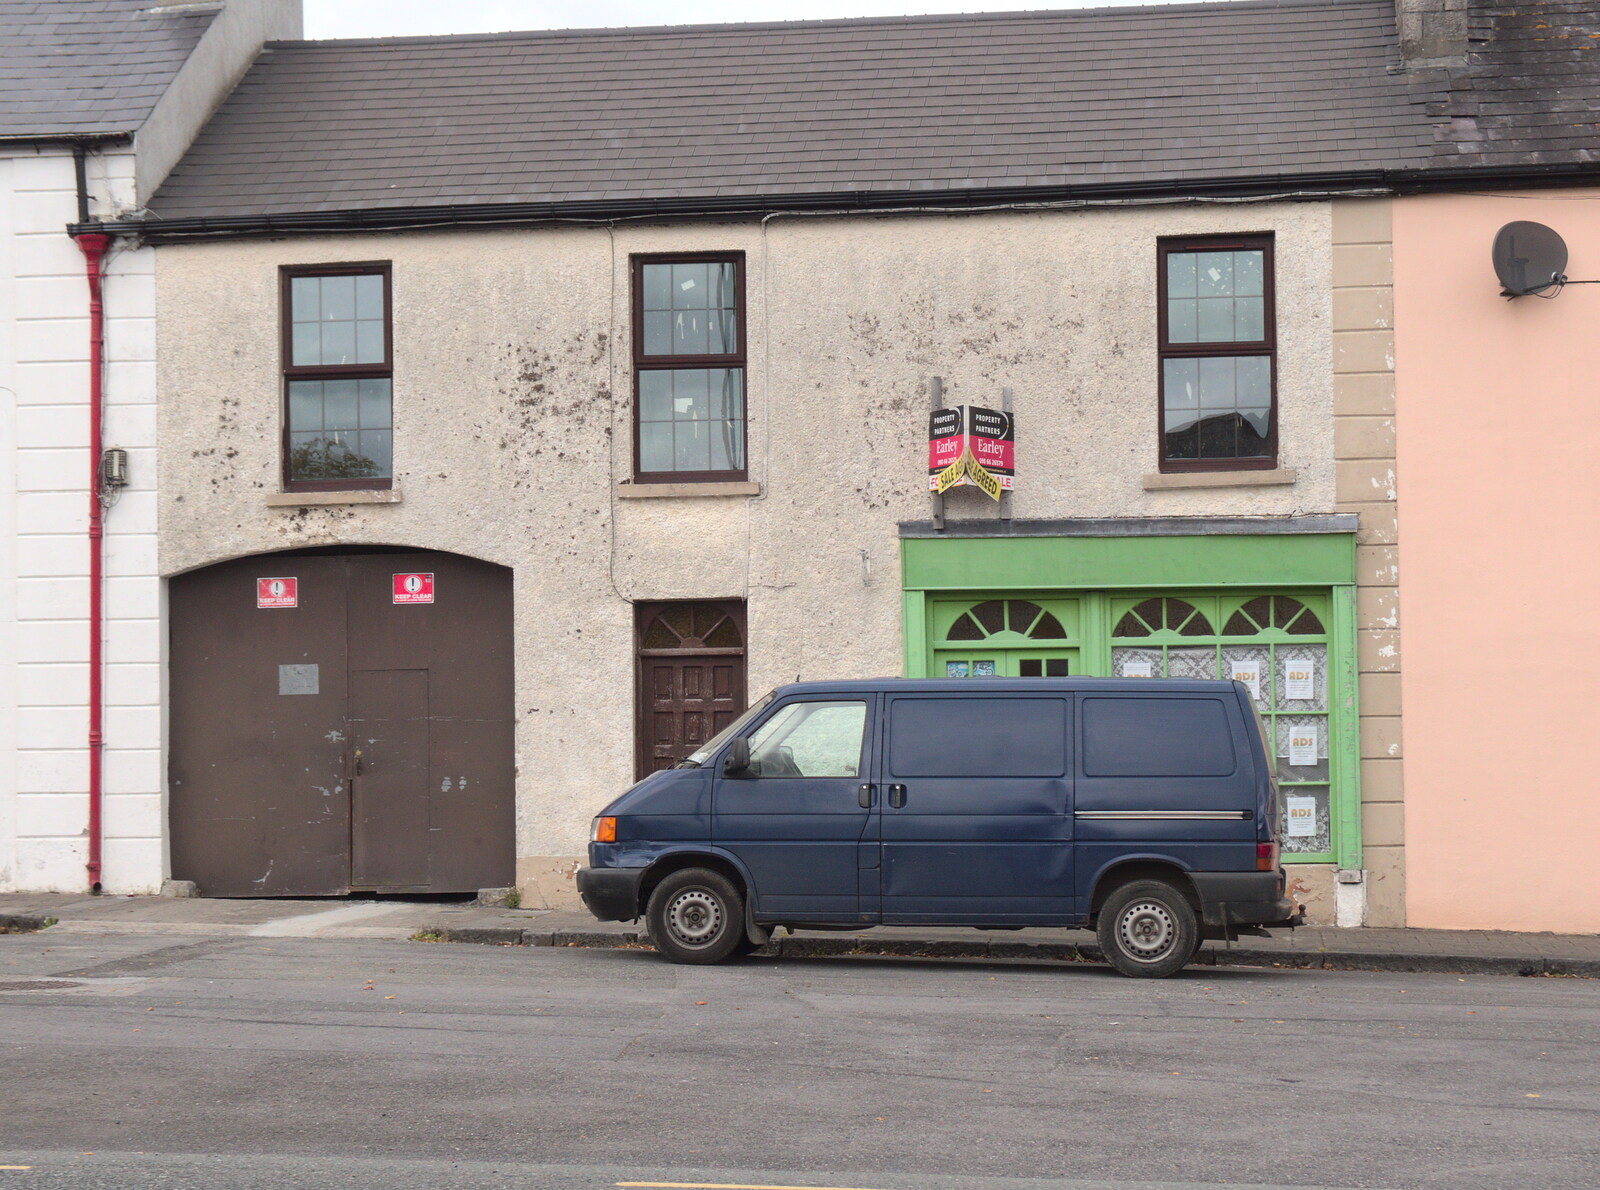 A knackered van and a house for sale from From Achill to Strokestown, Mayo and Roscommon, Ireland - 10th August 2017